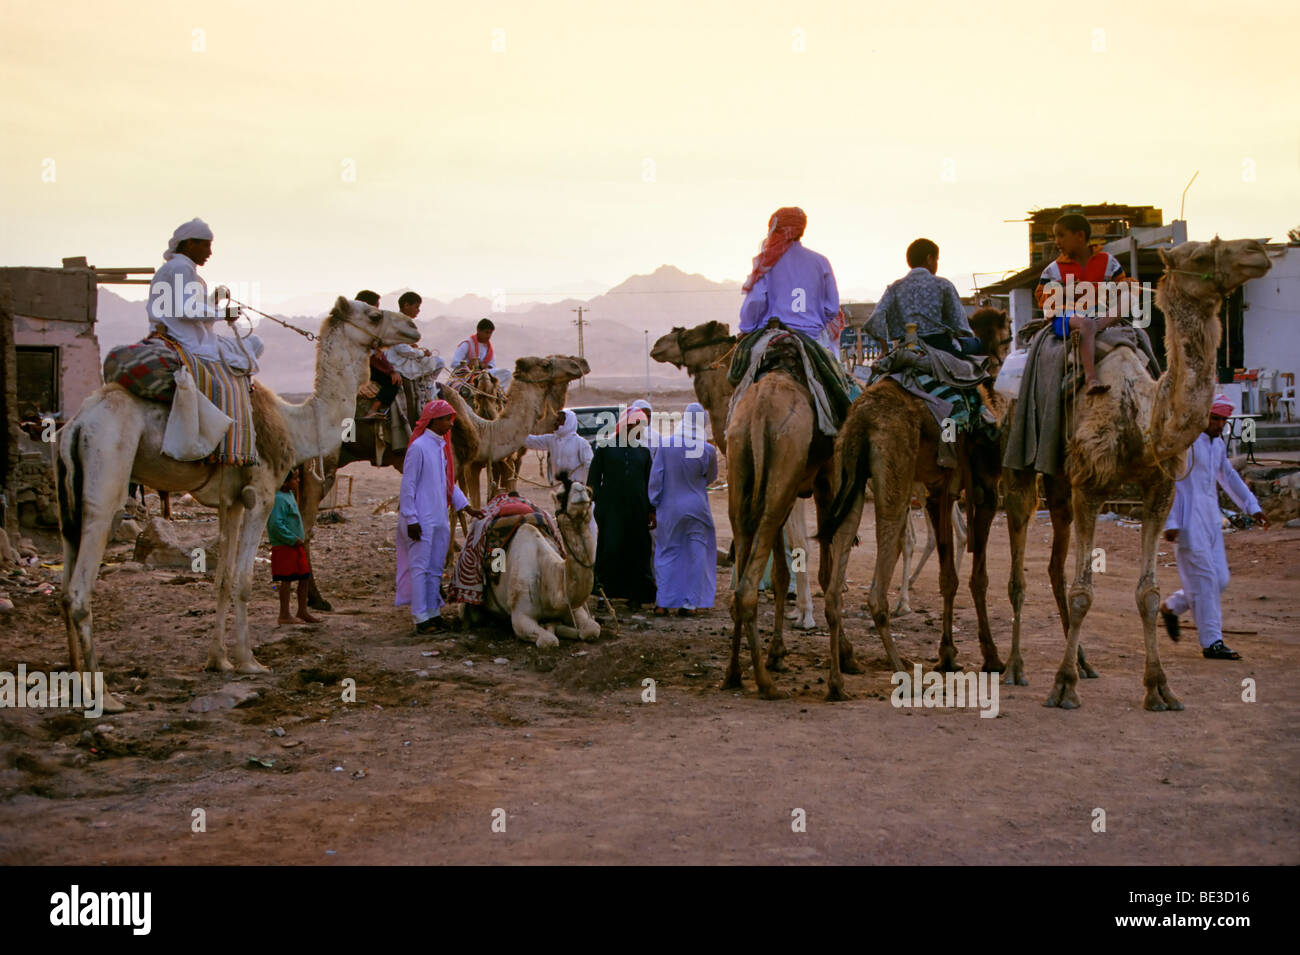 Camel Riders, Bedouins, Egyptians, camels, in the evening, Dahab, Sinai, Egypt, Africa Stock Photo